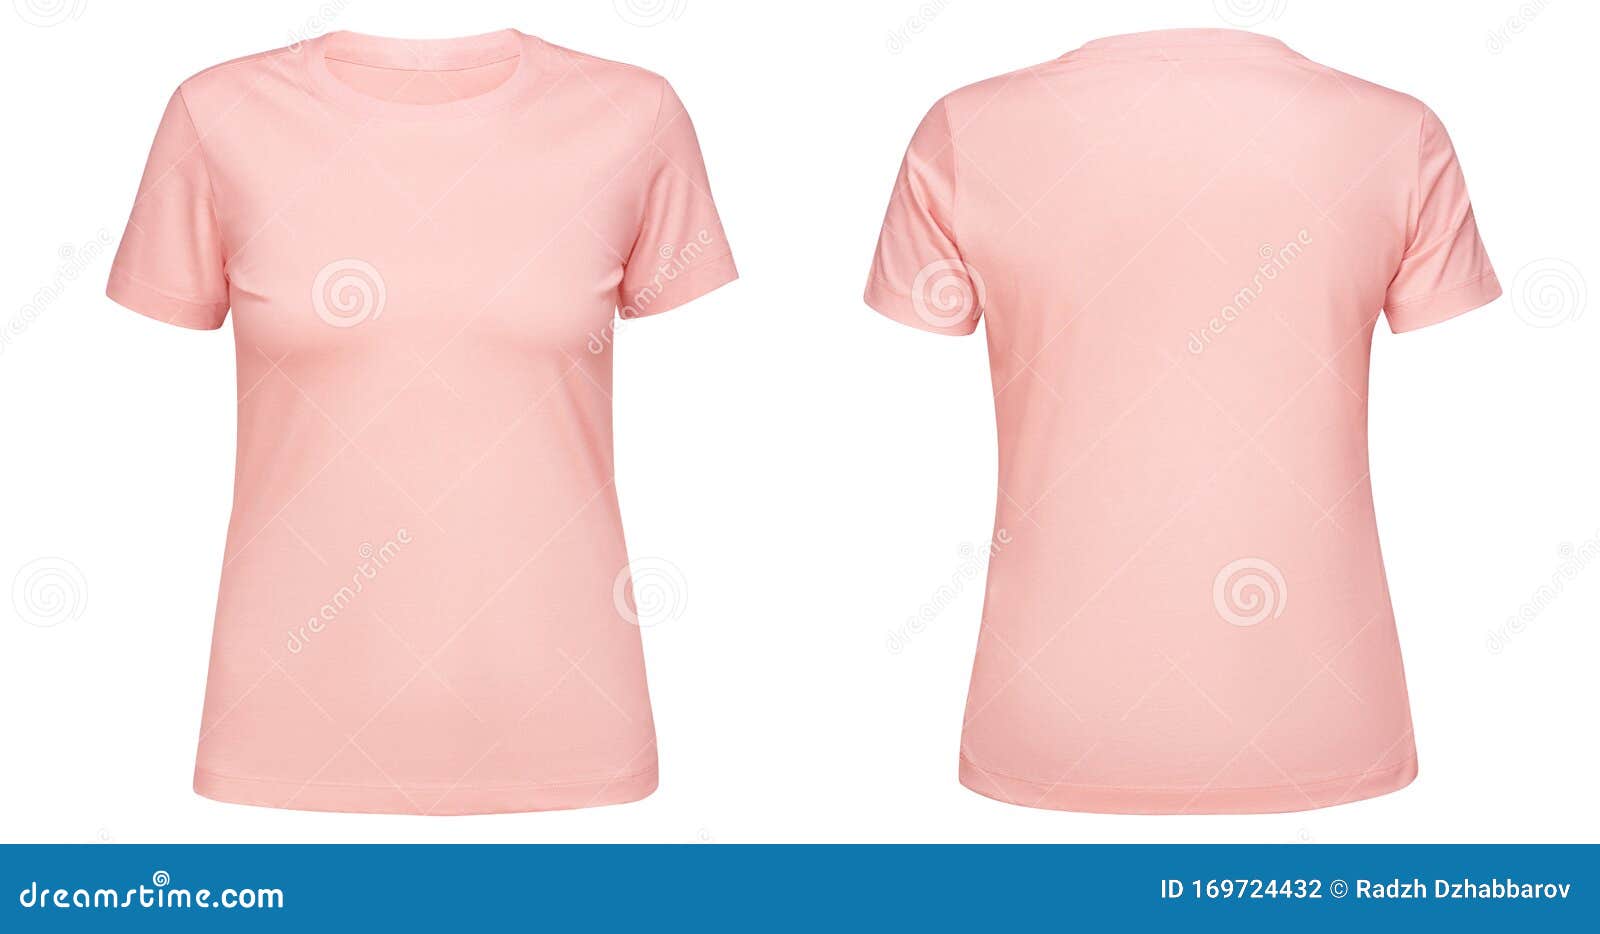 pink t shirt back and front